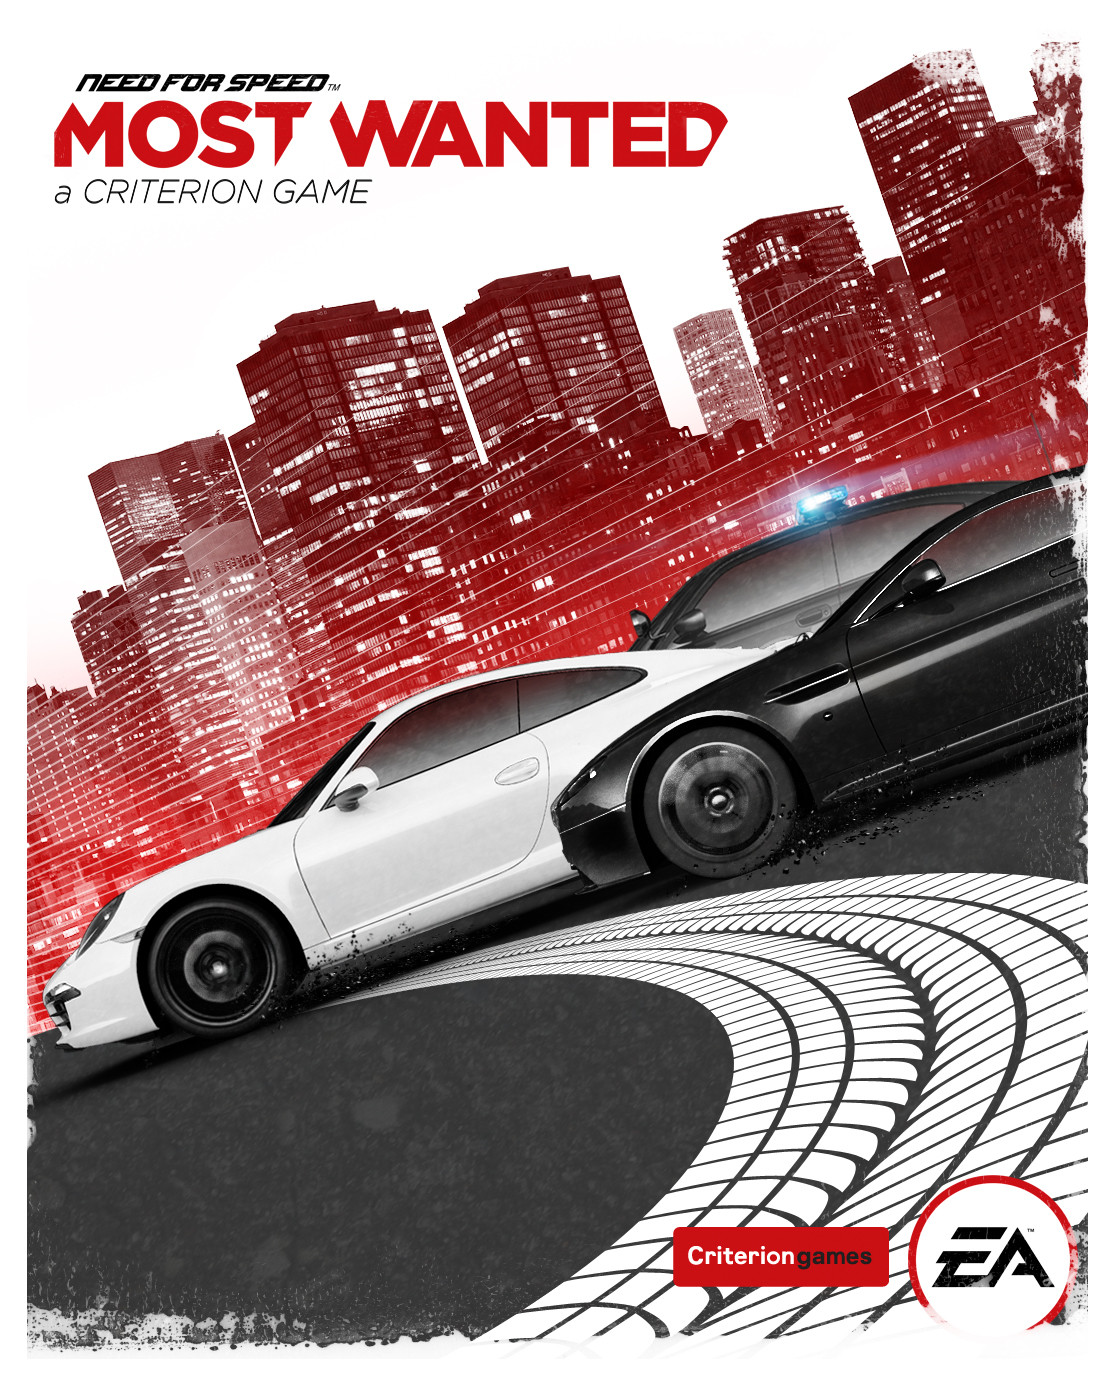 Need for Speed - Most Wanted Boxart 001